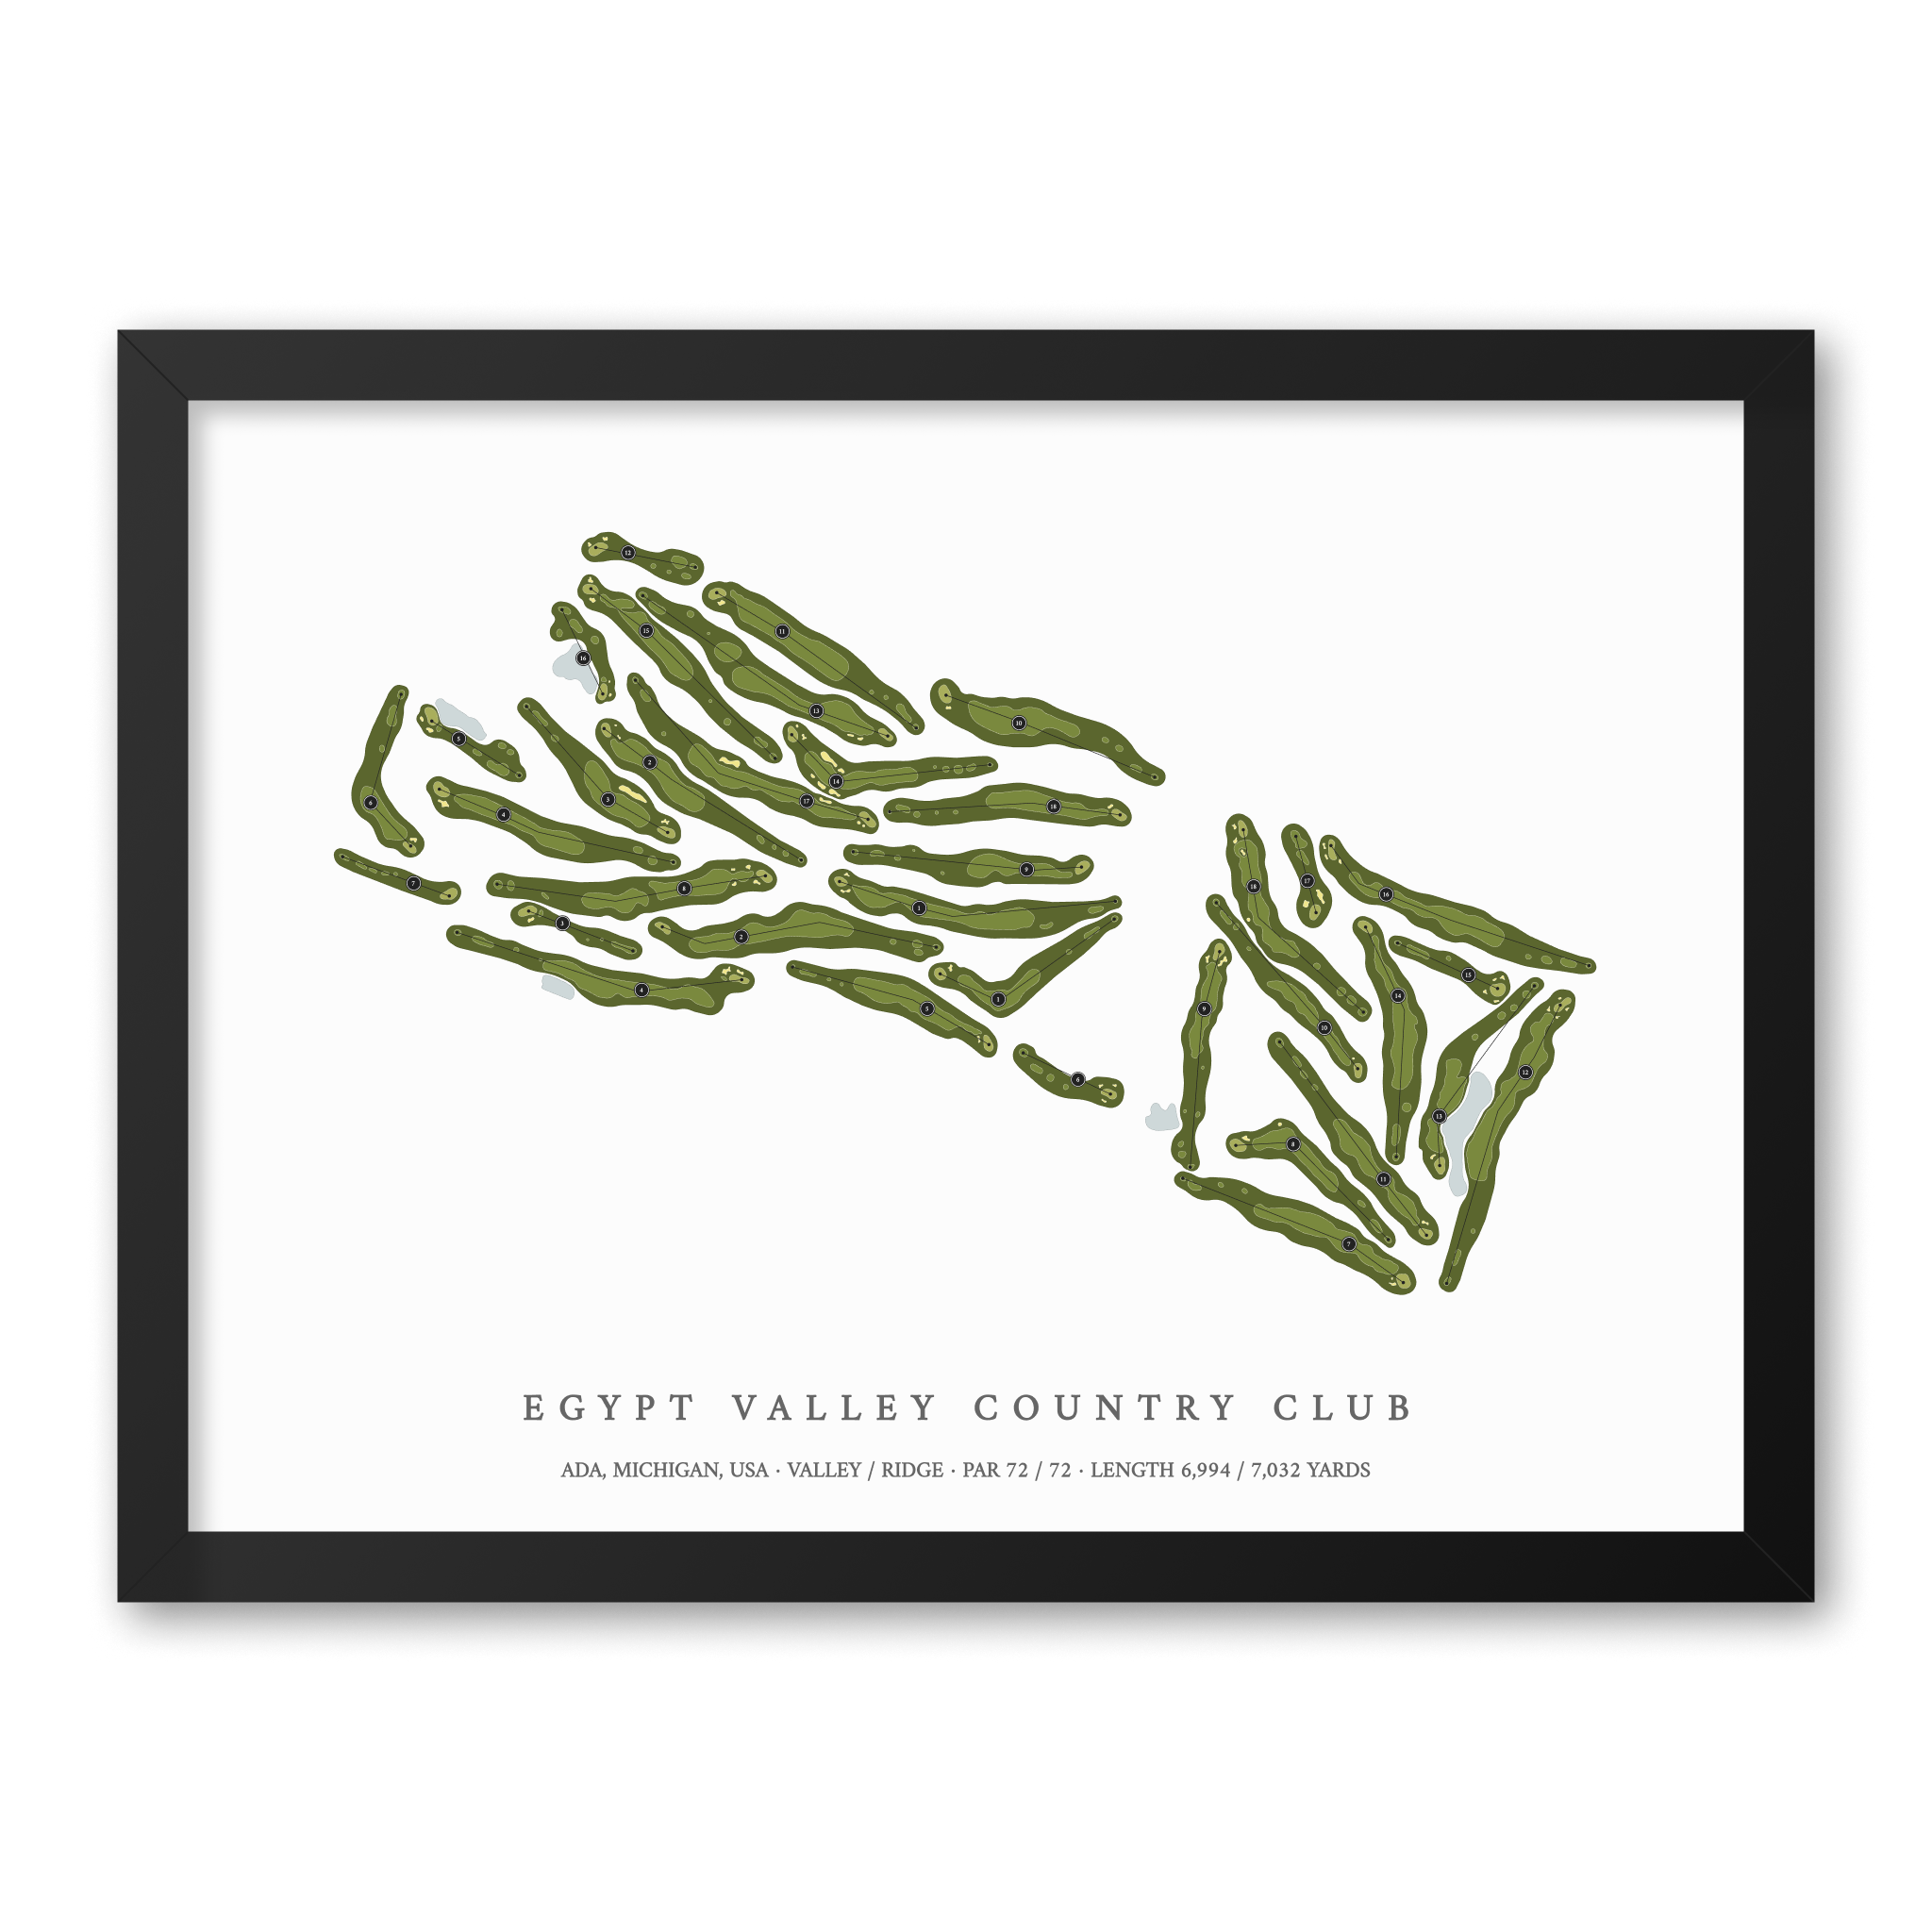 Egypt Valley Country Club| Golf Course Print | Black Frame With Hole Numbers #hole numbers_yes